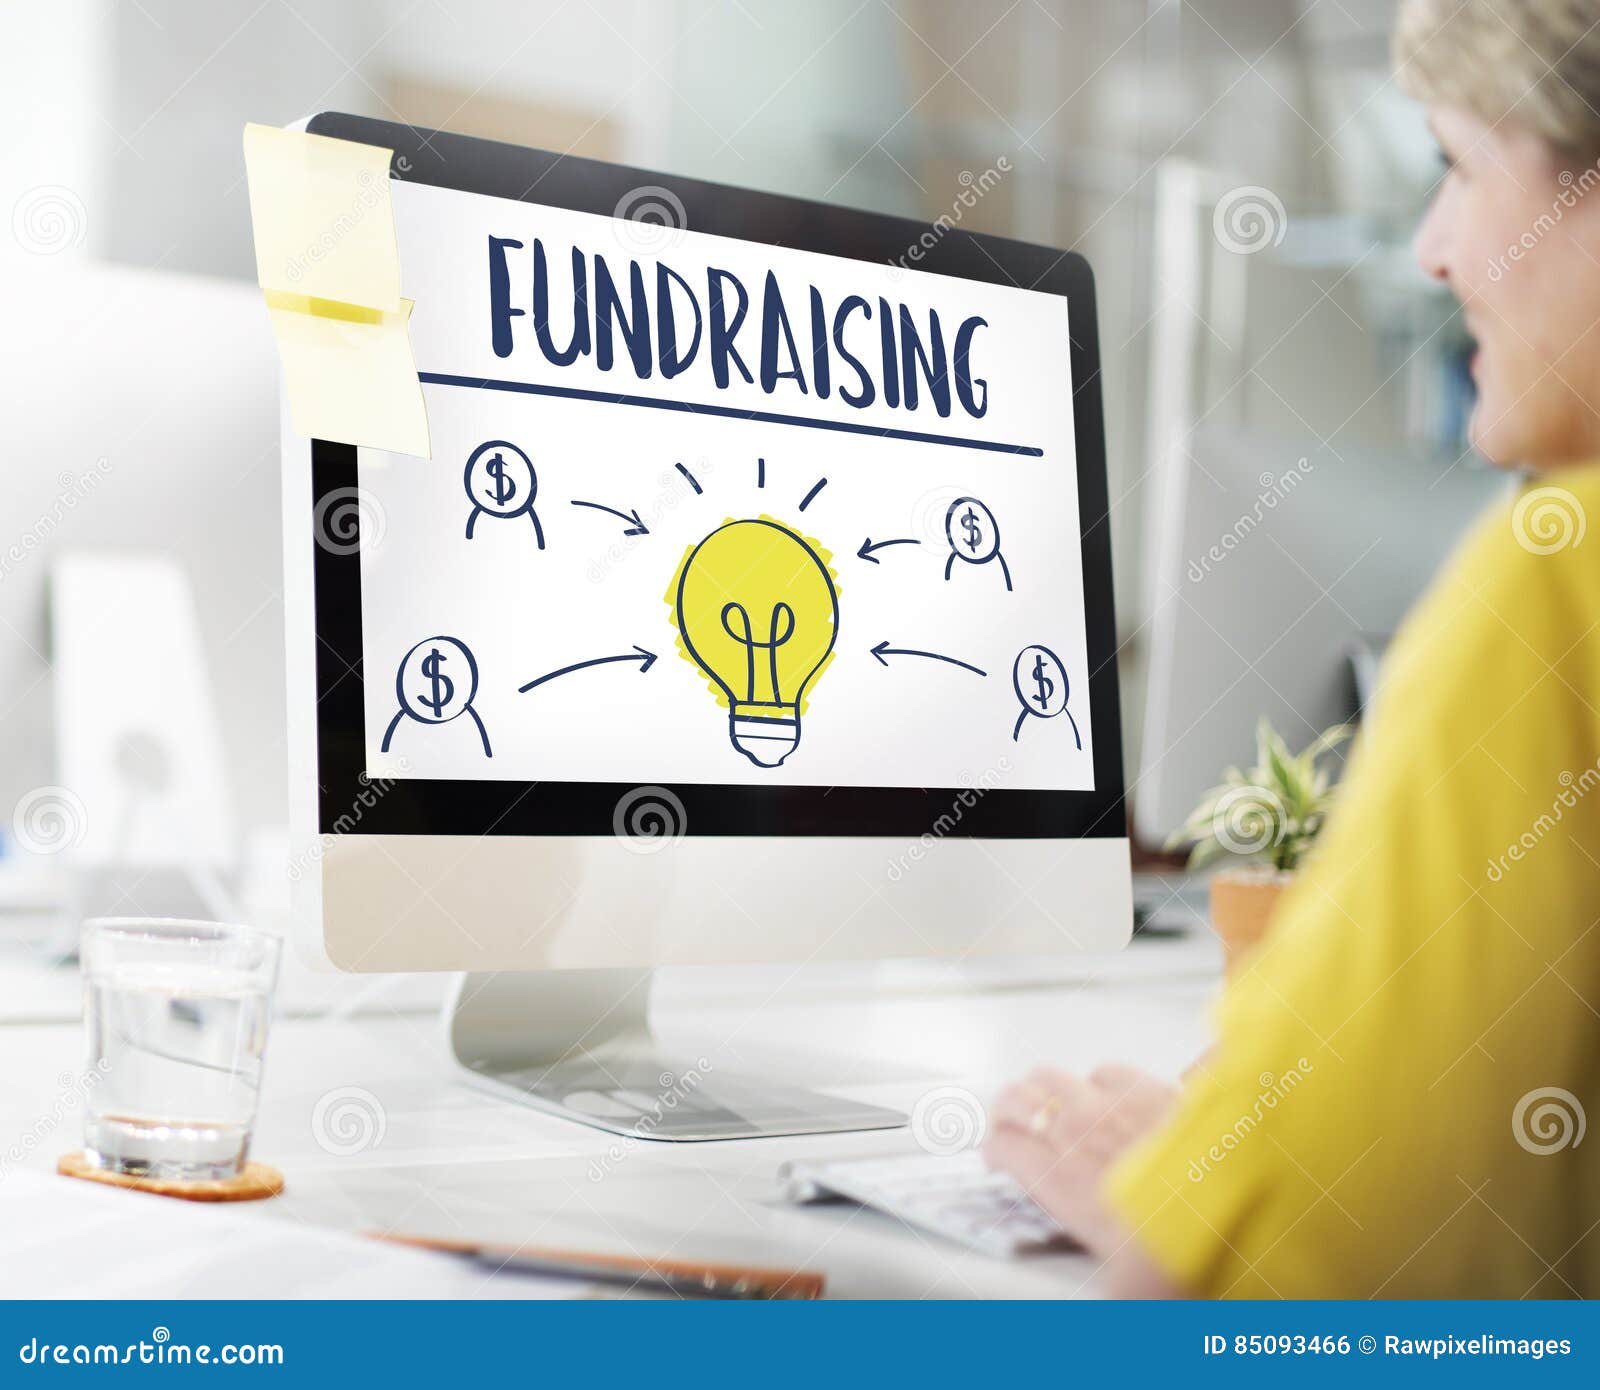 fundraising capital donation funds support concept